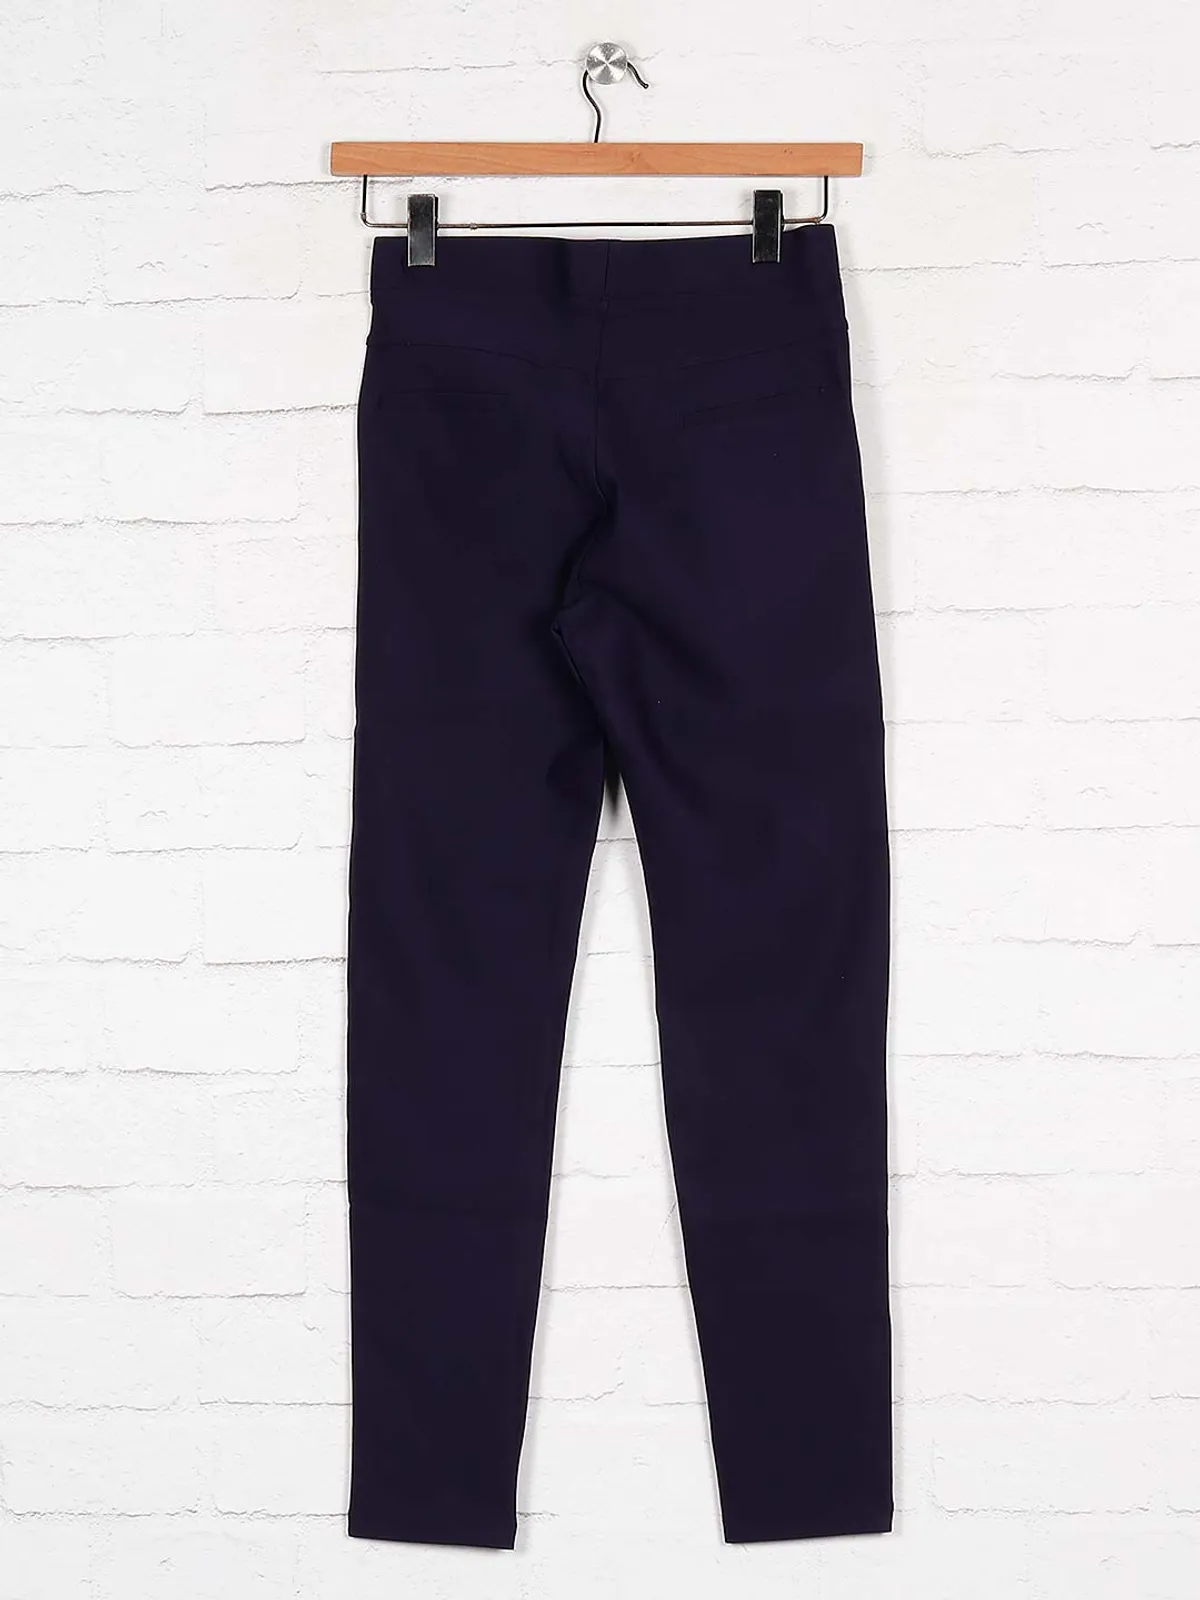 Boom navy blue slim fit casual jeggings in cotton